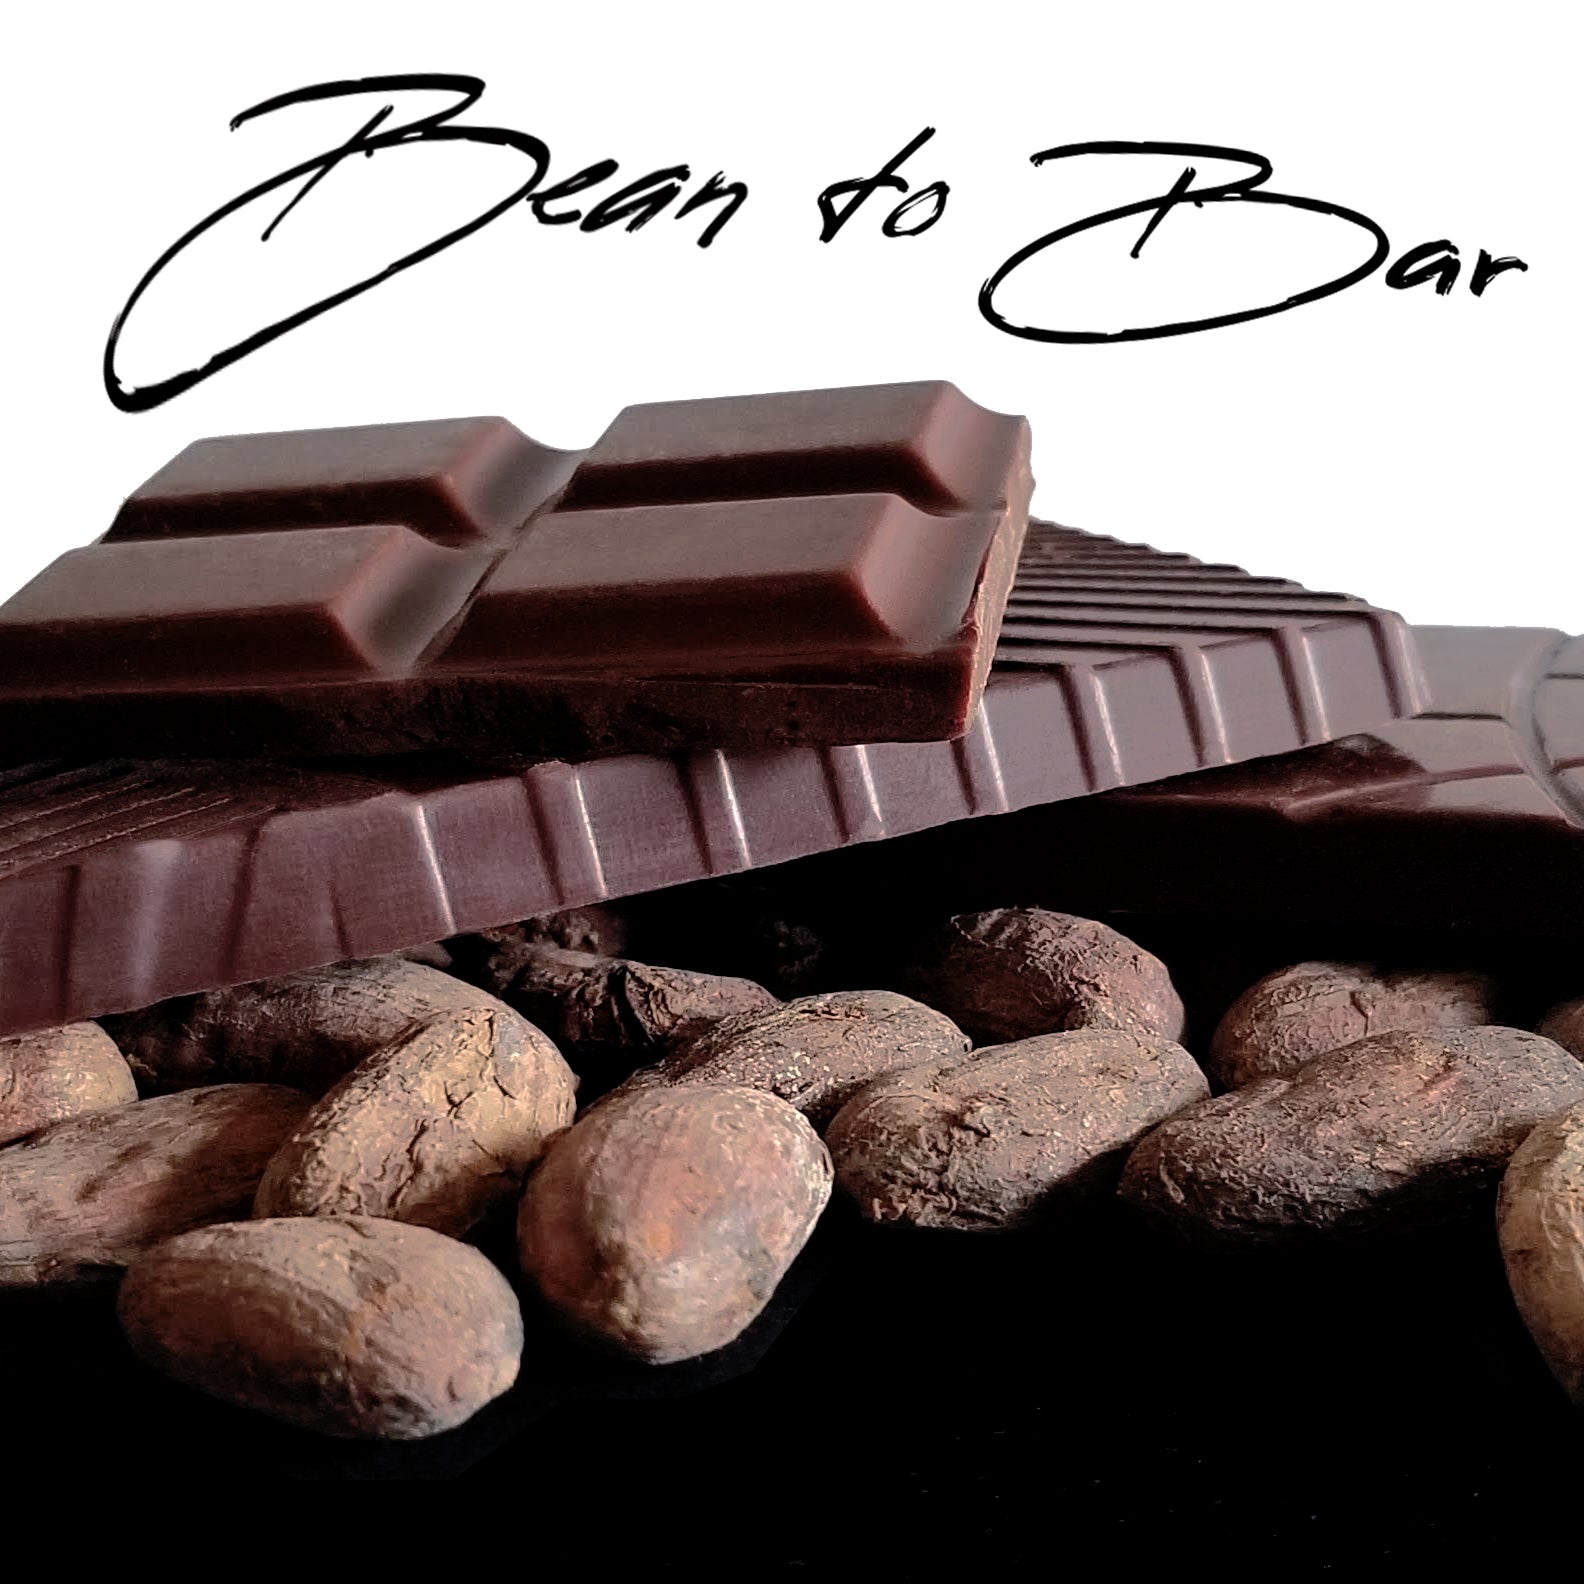 bean to bar chocolate and cocoa beans